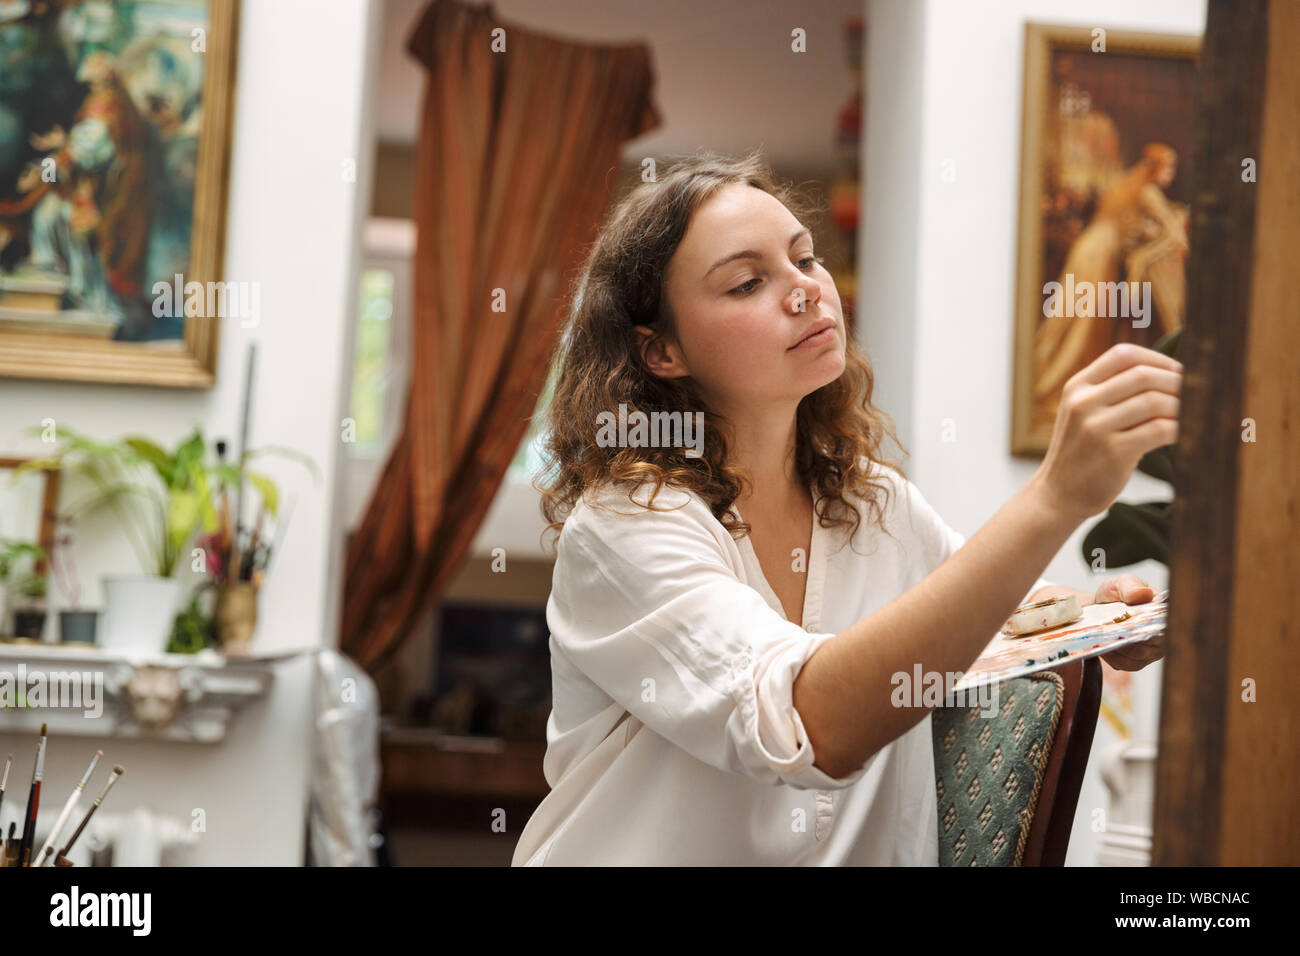 Image of beautiful artistic woman sitting on chair while drawing picture on canvas with pain brush and acrylic colors in workshop or master class Stock Photo